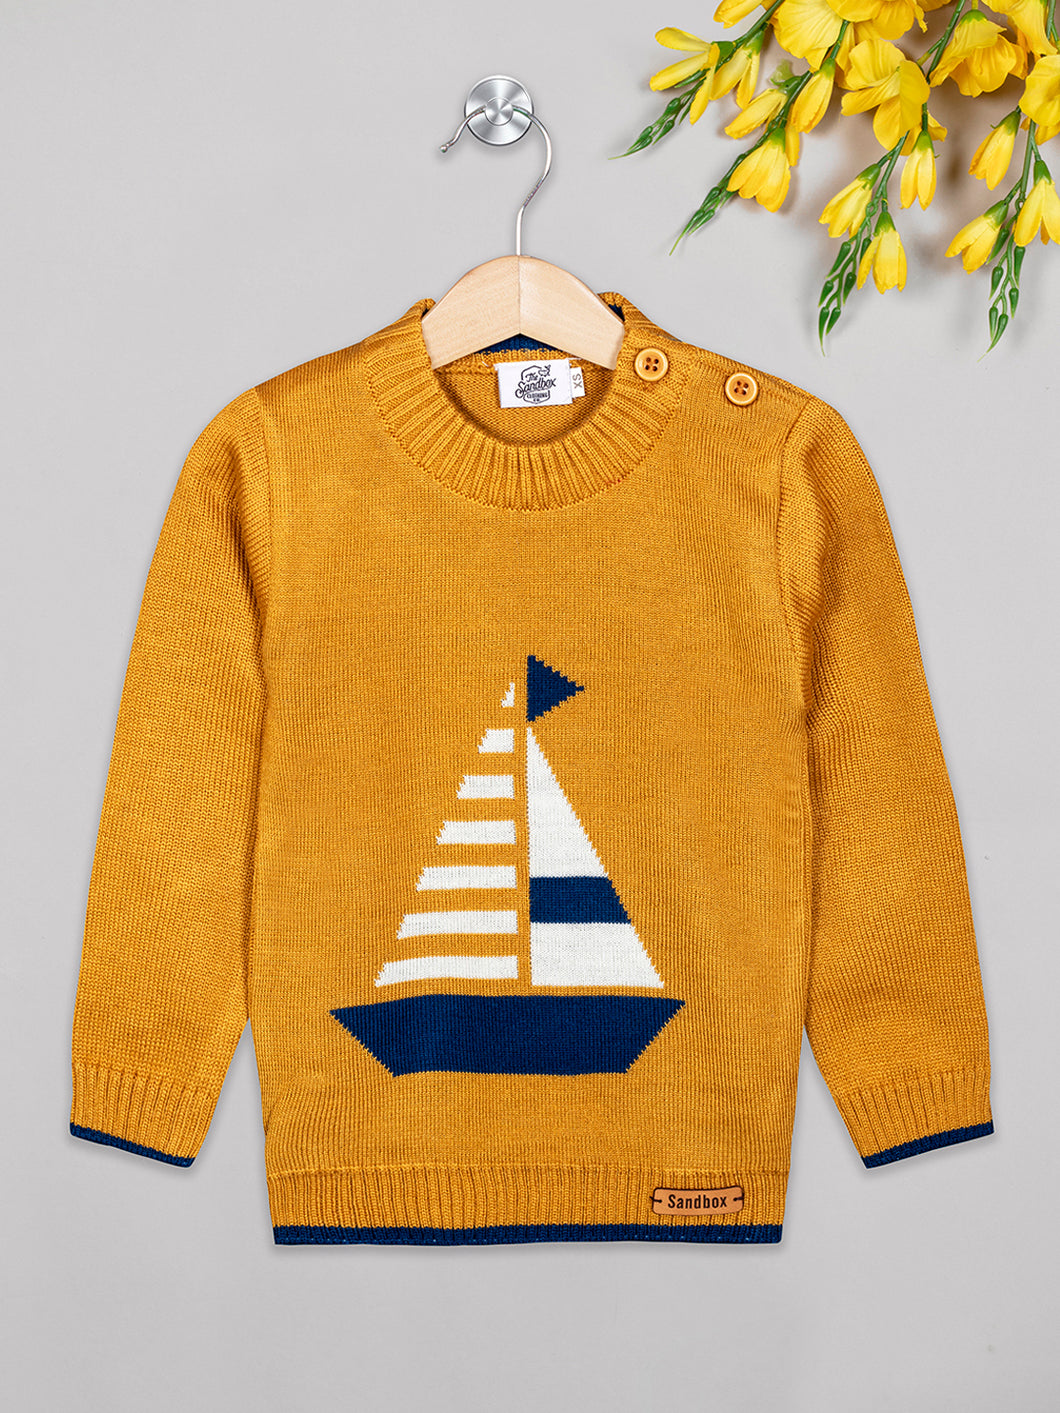 Boys winter woolen full sleeves round neck sweater in yellow